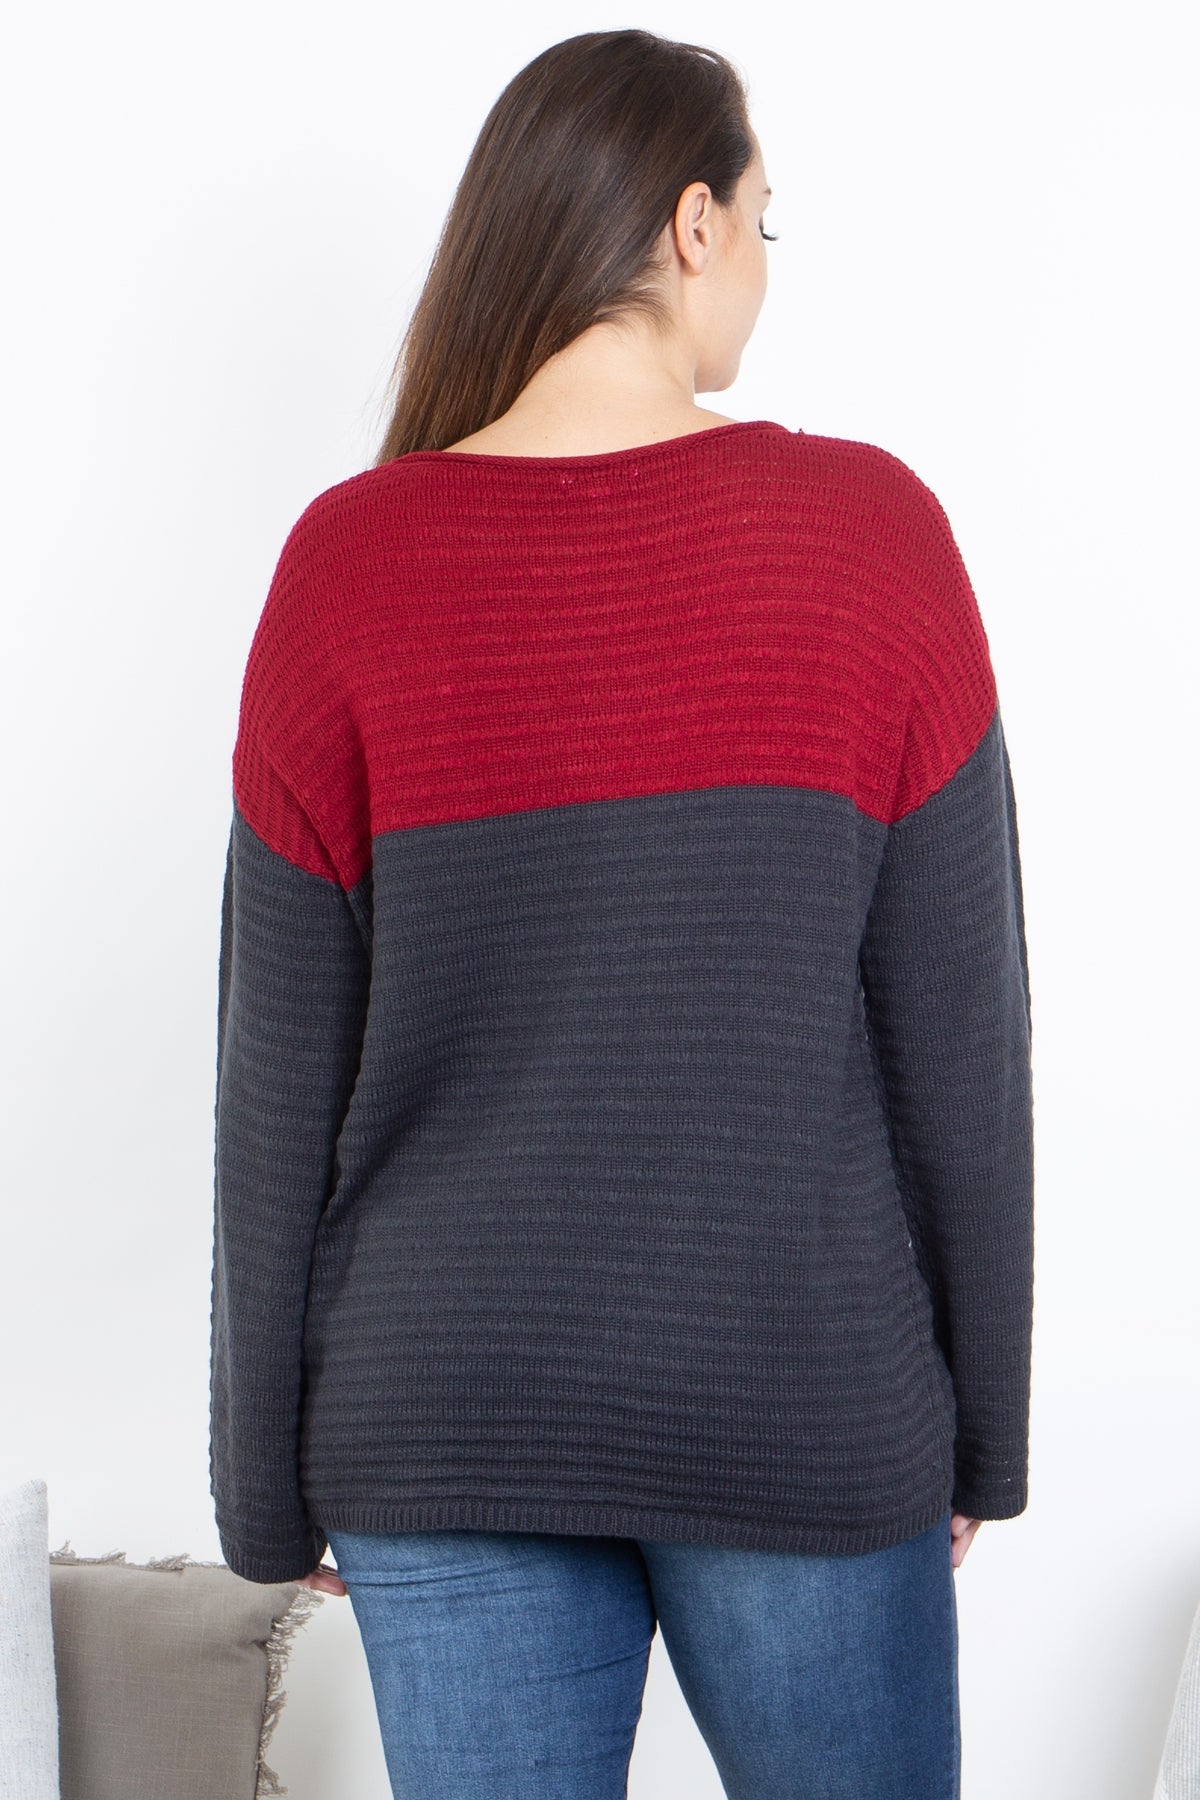 BURGUNDY CHARCOAL PLUS SIZE TEXTURED SWEATER